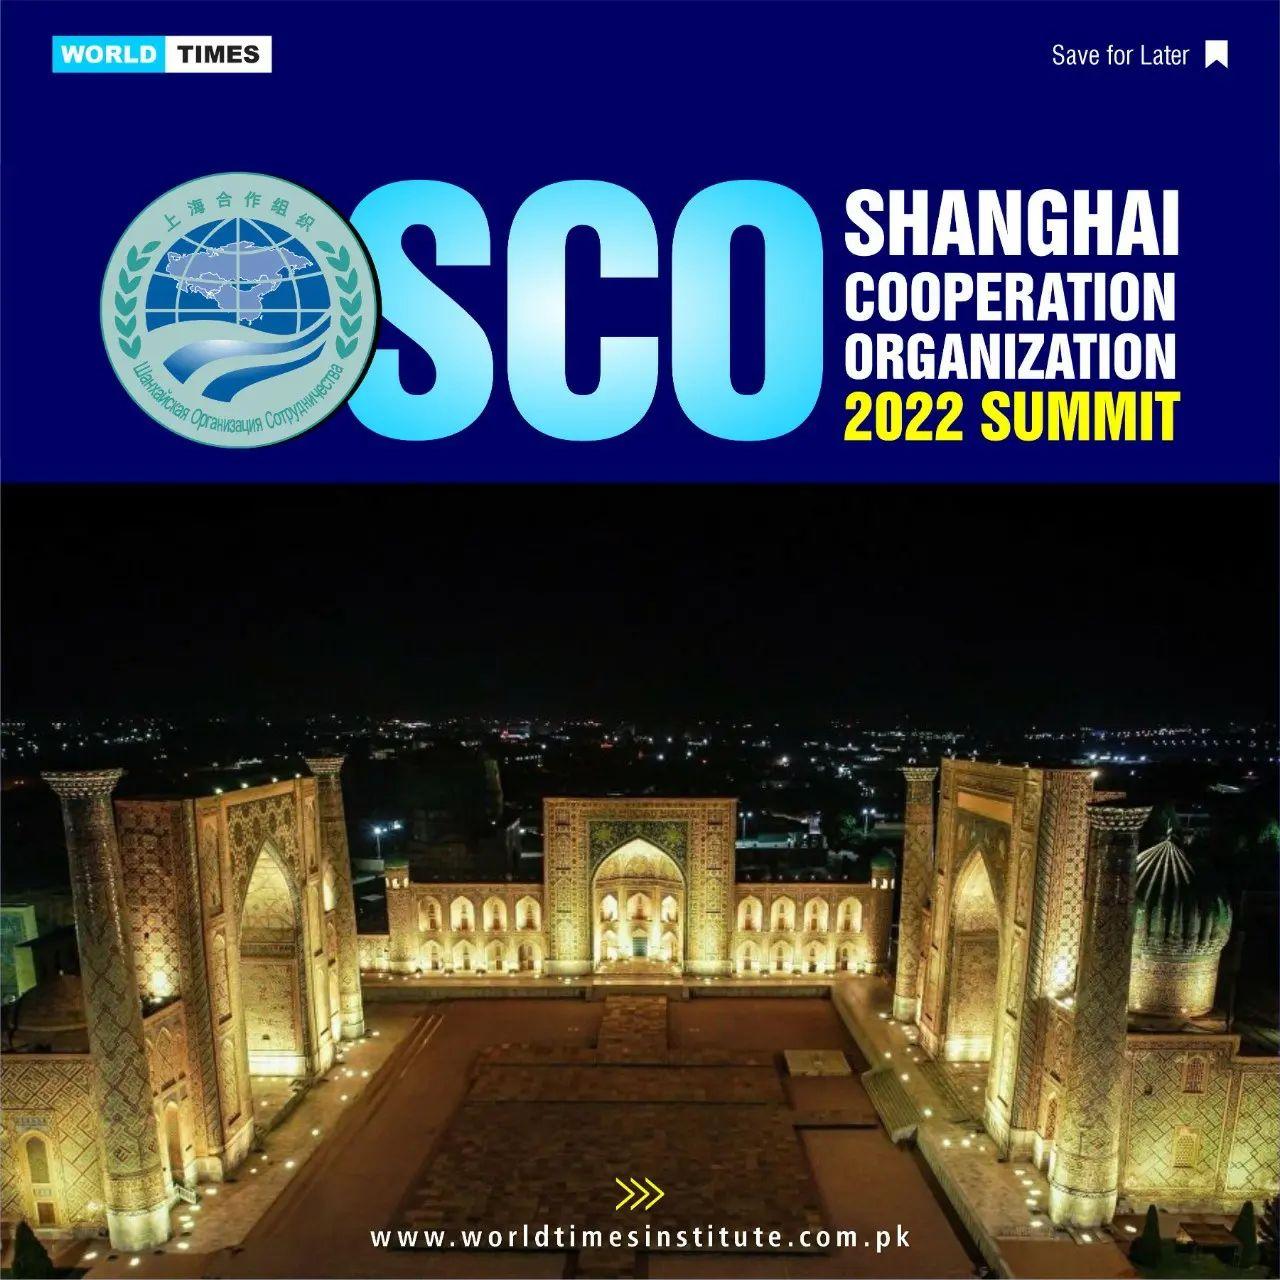 You are currently viewing Shanghai Corporation Organization 2022 Summit SCO 21-09-2022